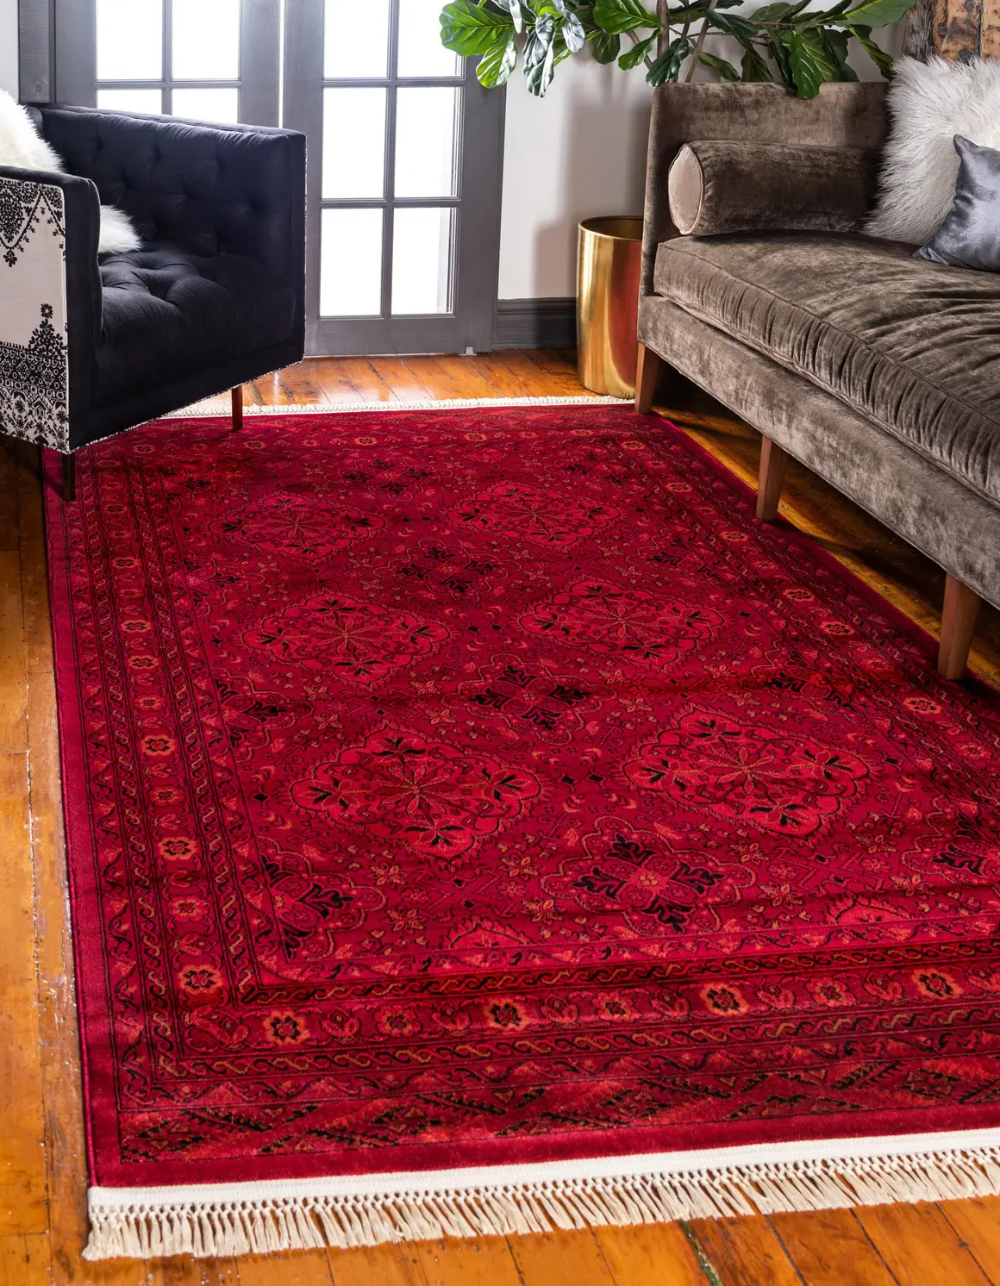 Guide to bokhara rugs